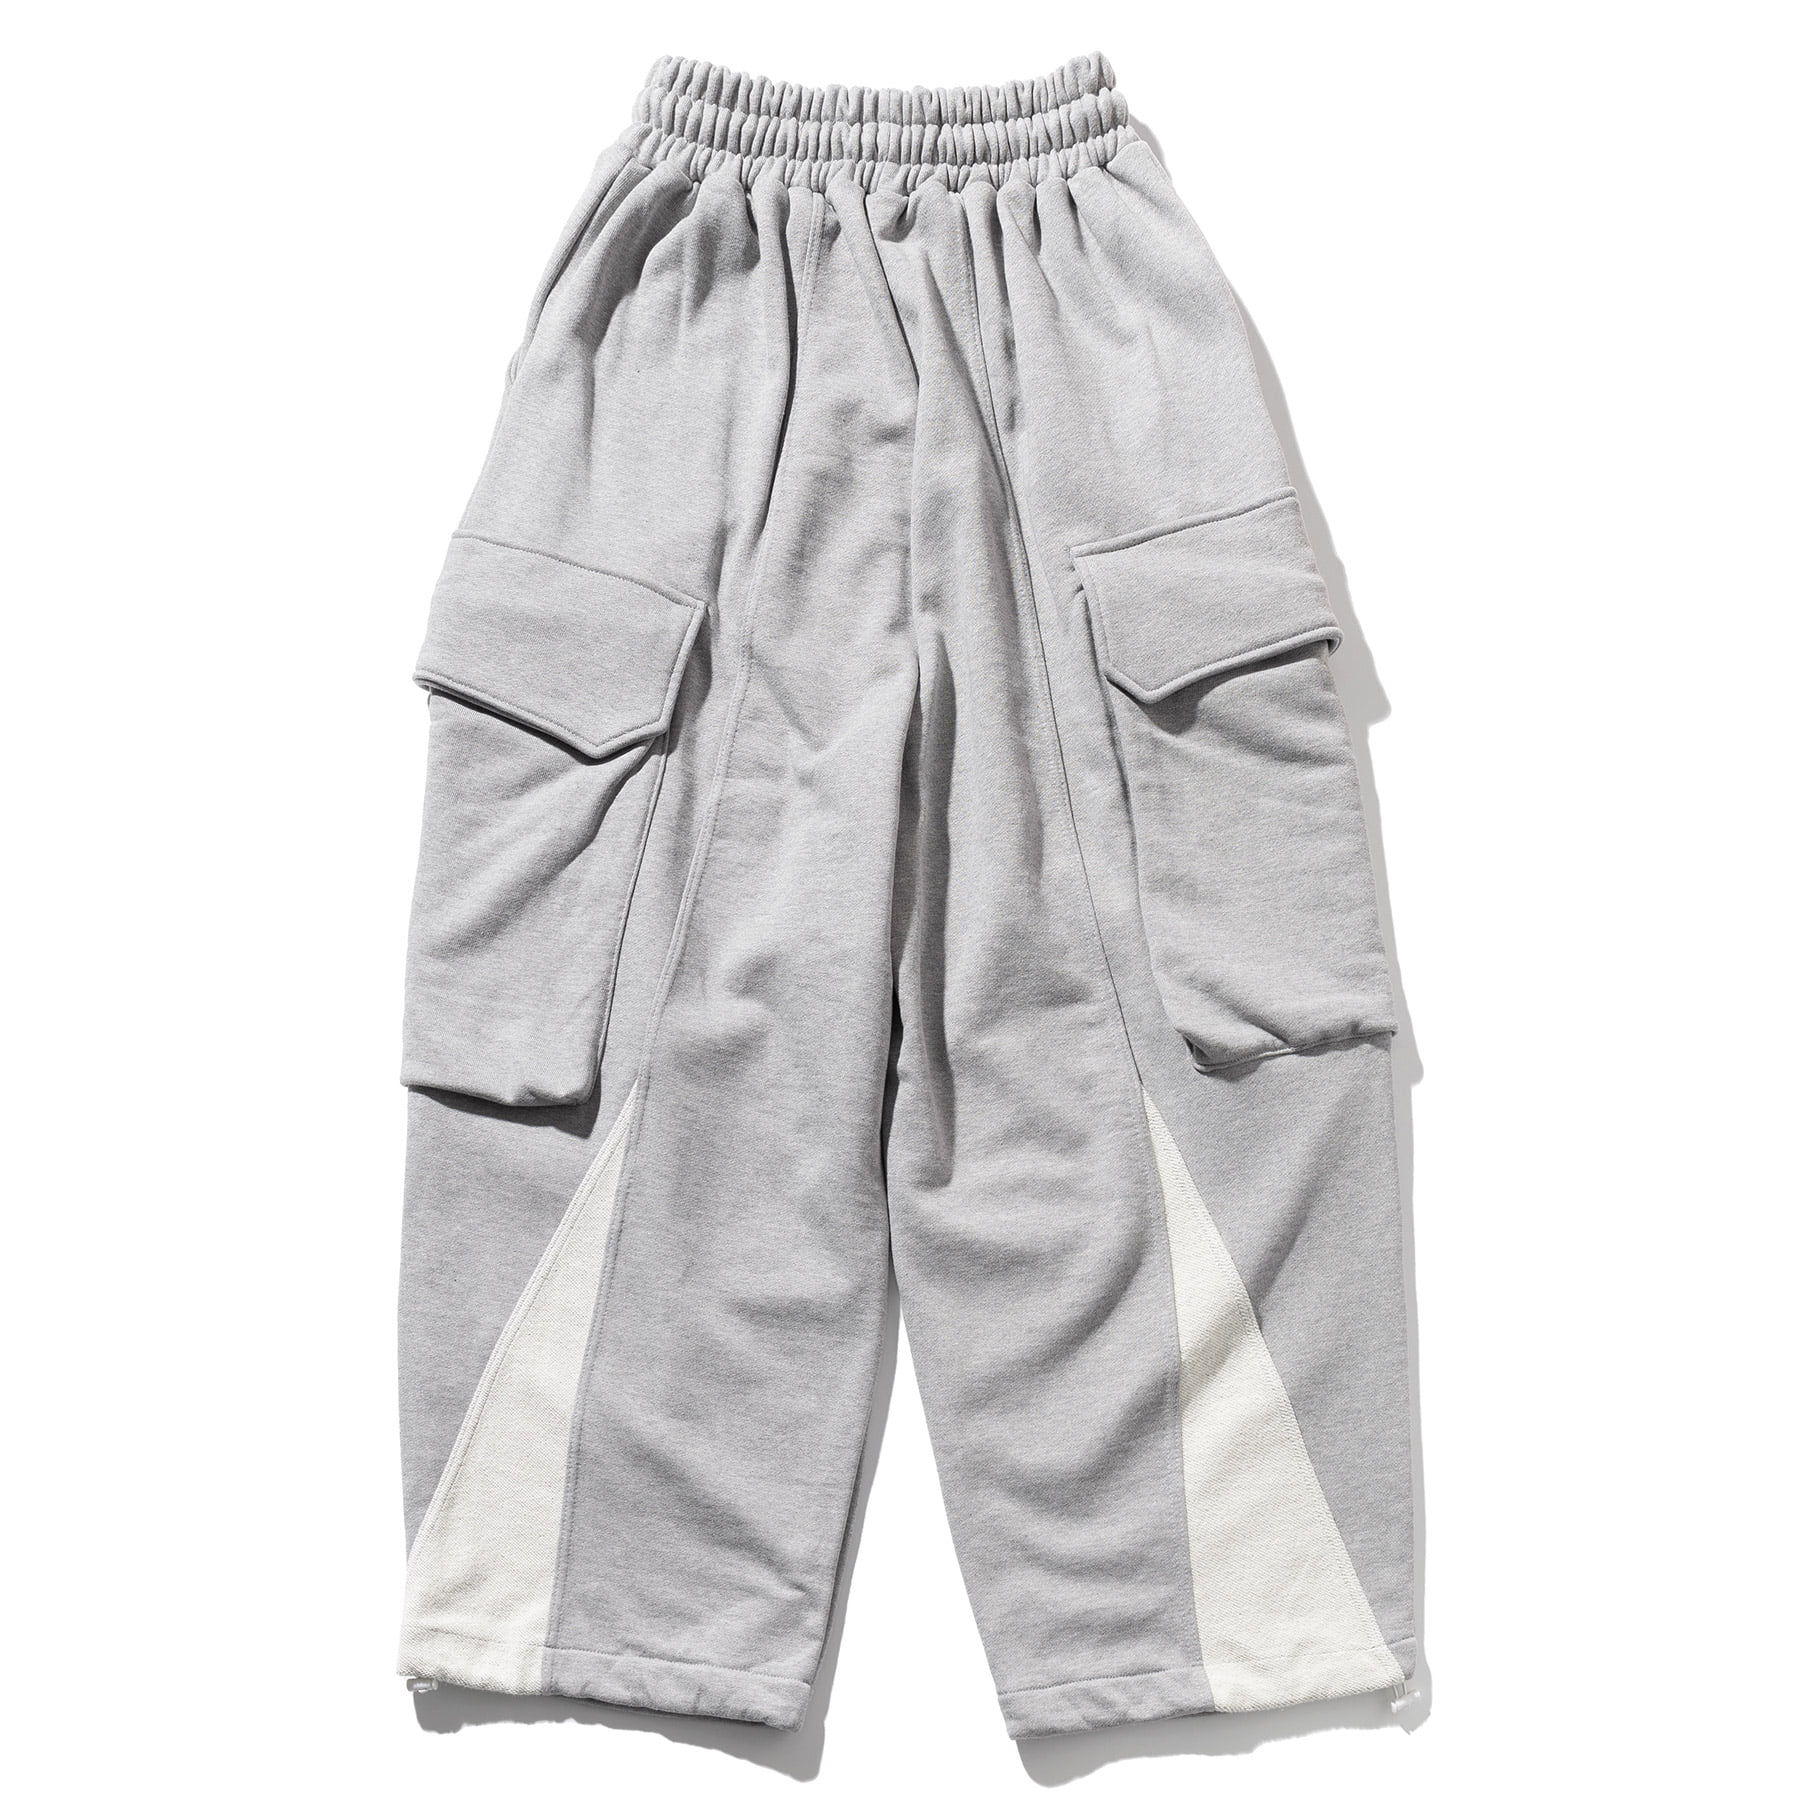 DIVISION WIDE CARGO STRING PANTS-MFTTP003-GY